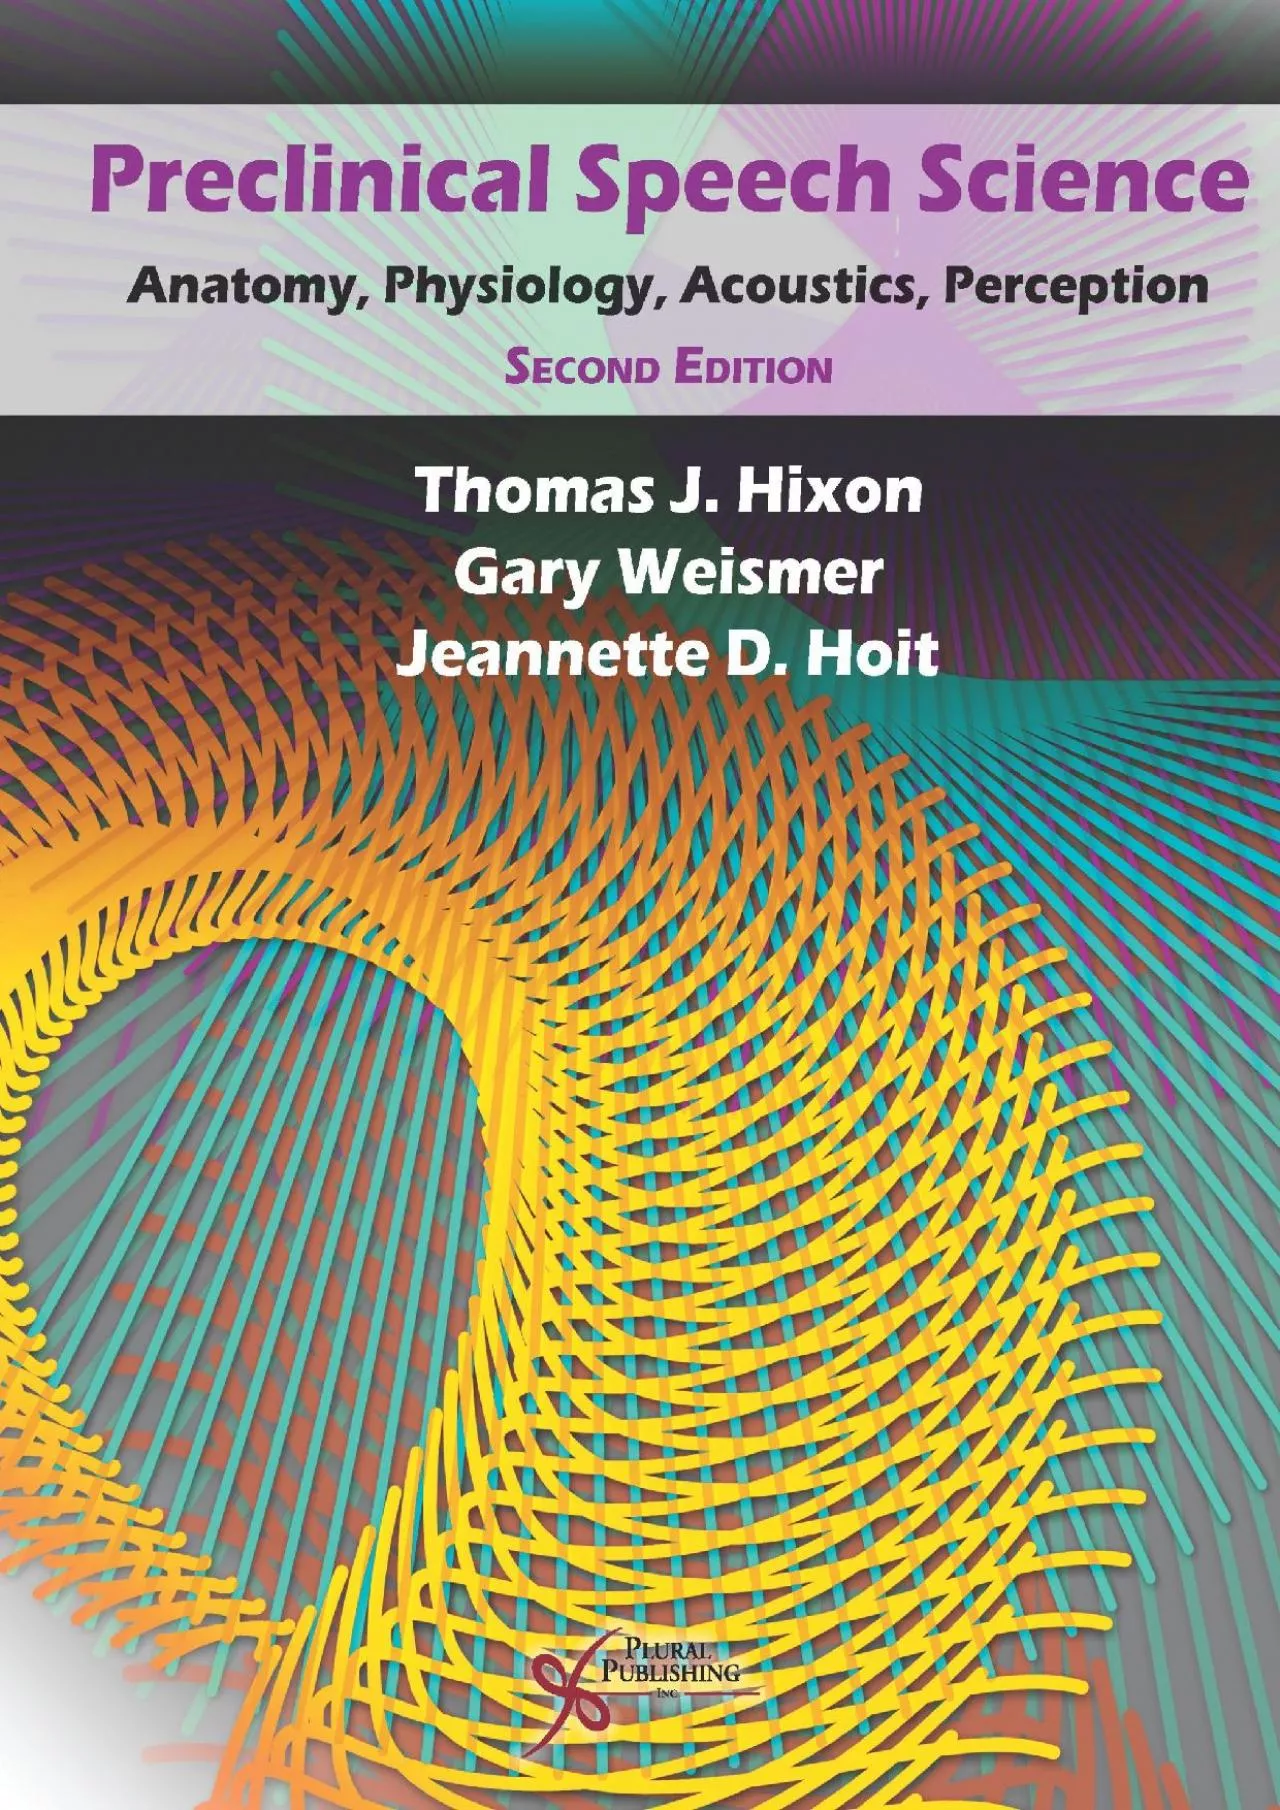 (BOOS)-Preclinical Speech Science: Anatomy, Physiology, Acoustics, and Perception, Second